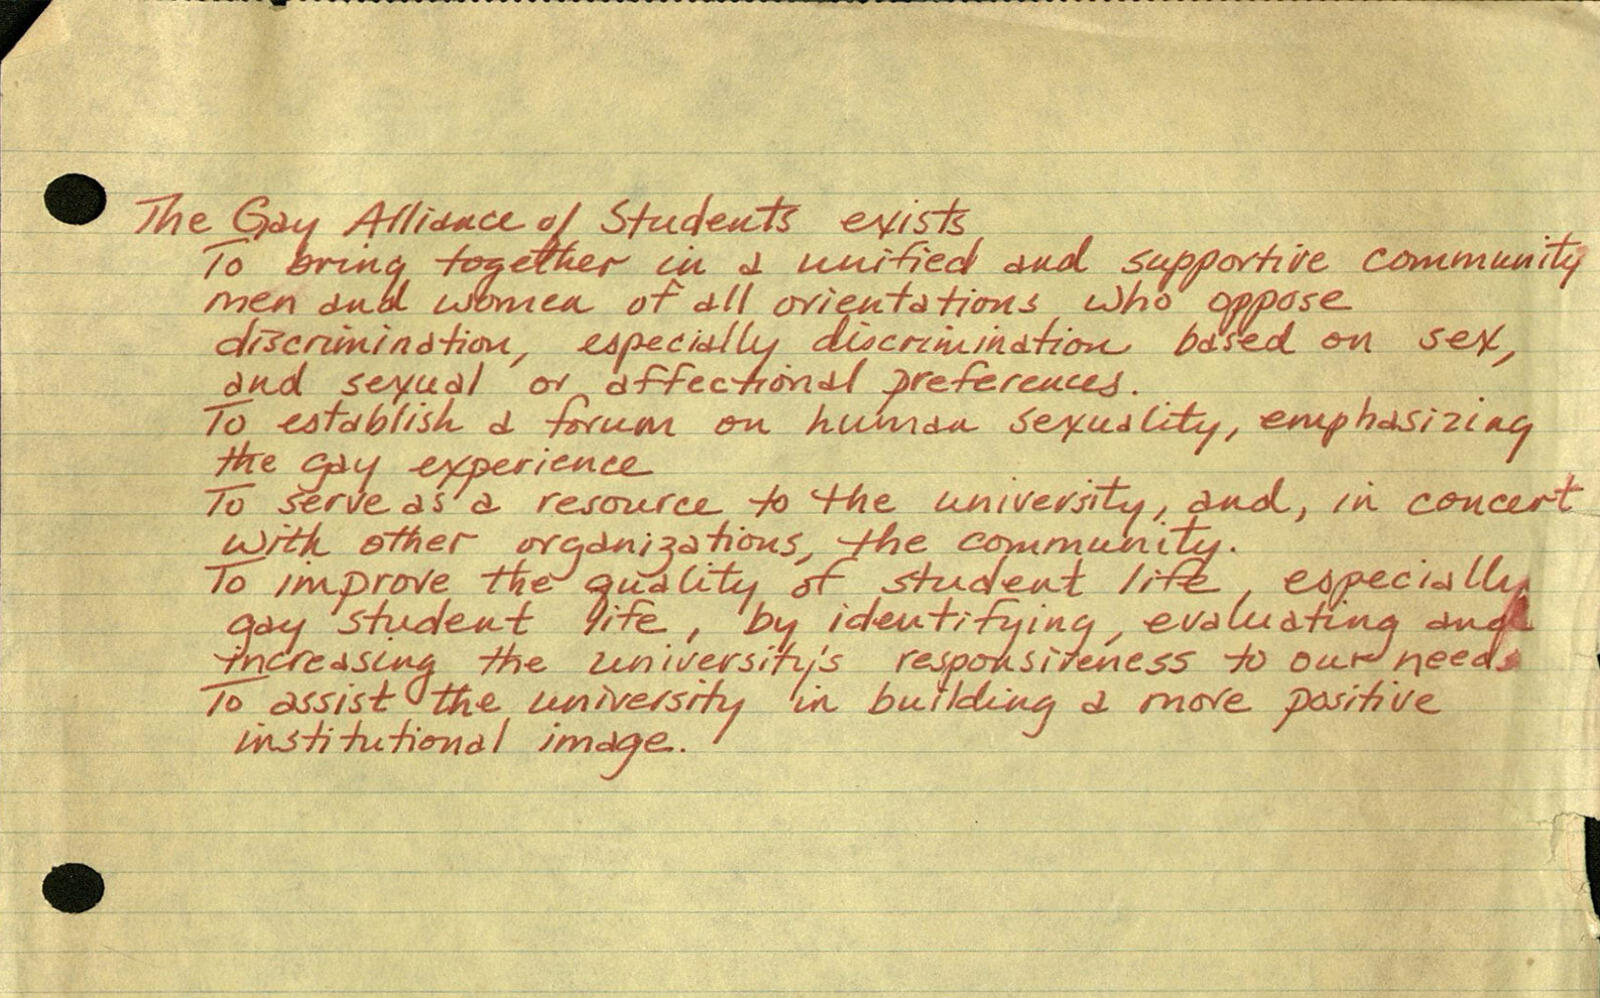 The Gay Alliance of Students’ draft statement of purpose.
<br>Source: The VCU Gay Alliance of Students Collection, 1974-1976, a collection in Special Collections and Archives, James Branch Cabell Library
